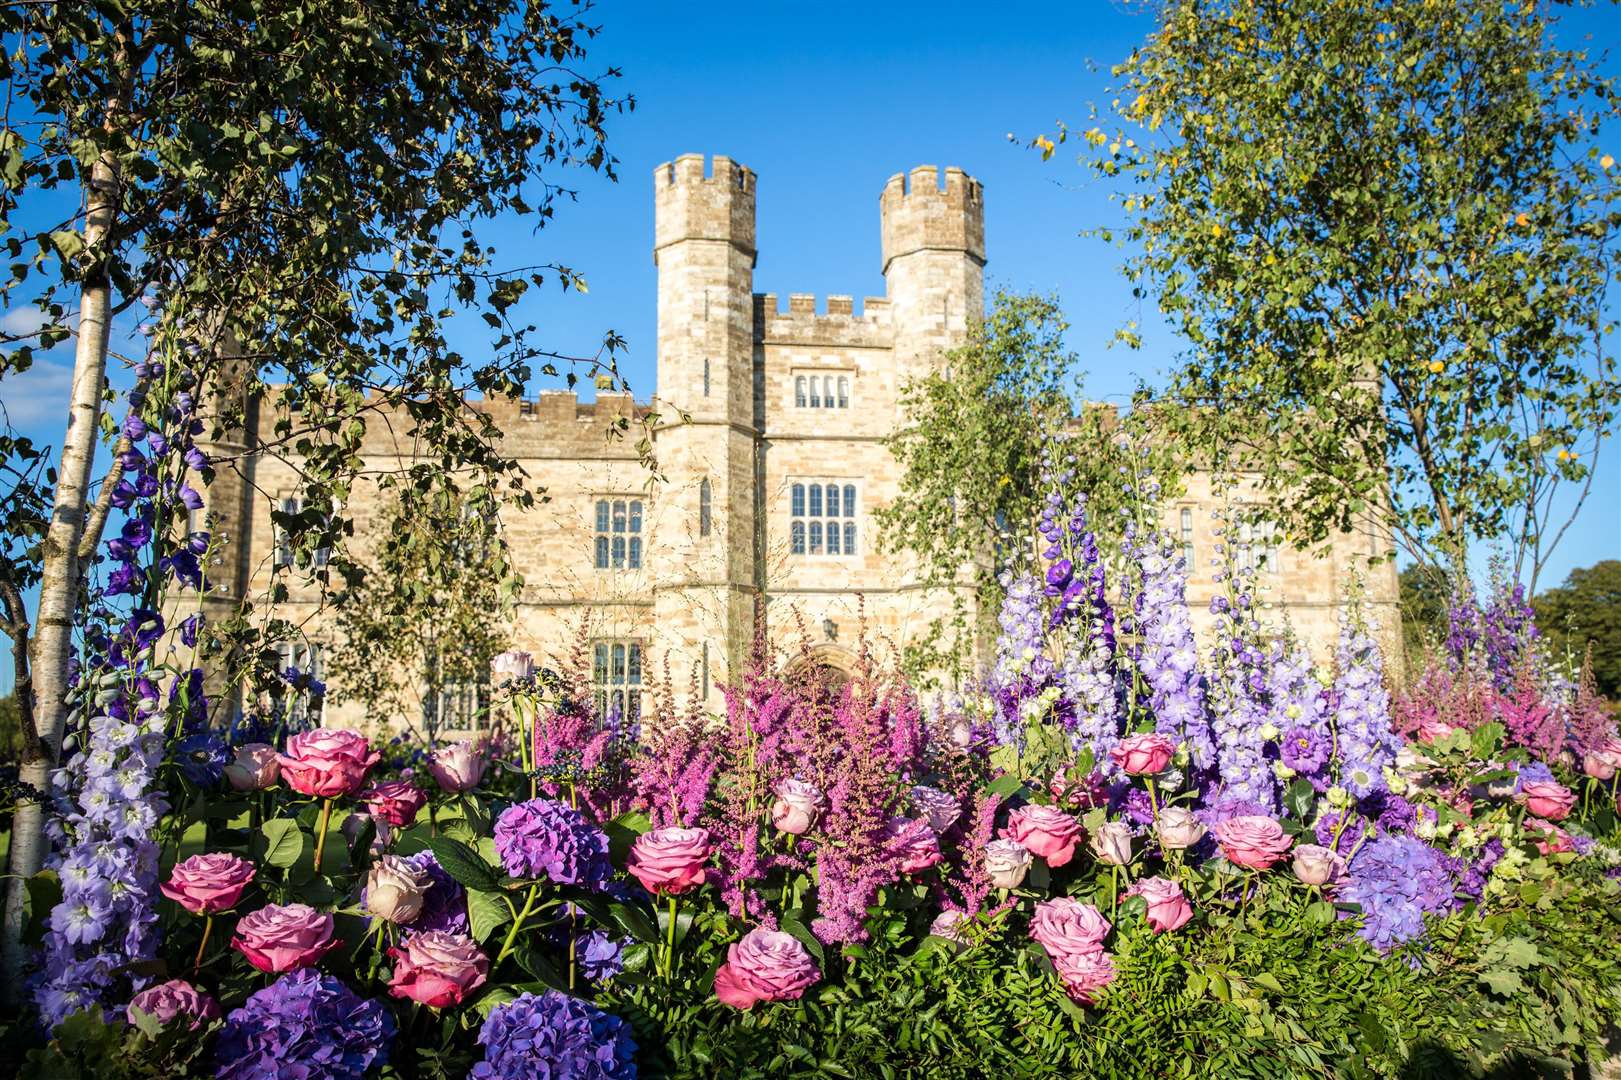 Leeds Castle during its Festival of Flowers Picture: www.matthewwalkerphotography.com